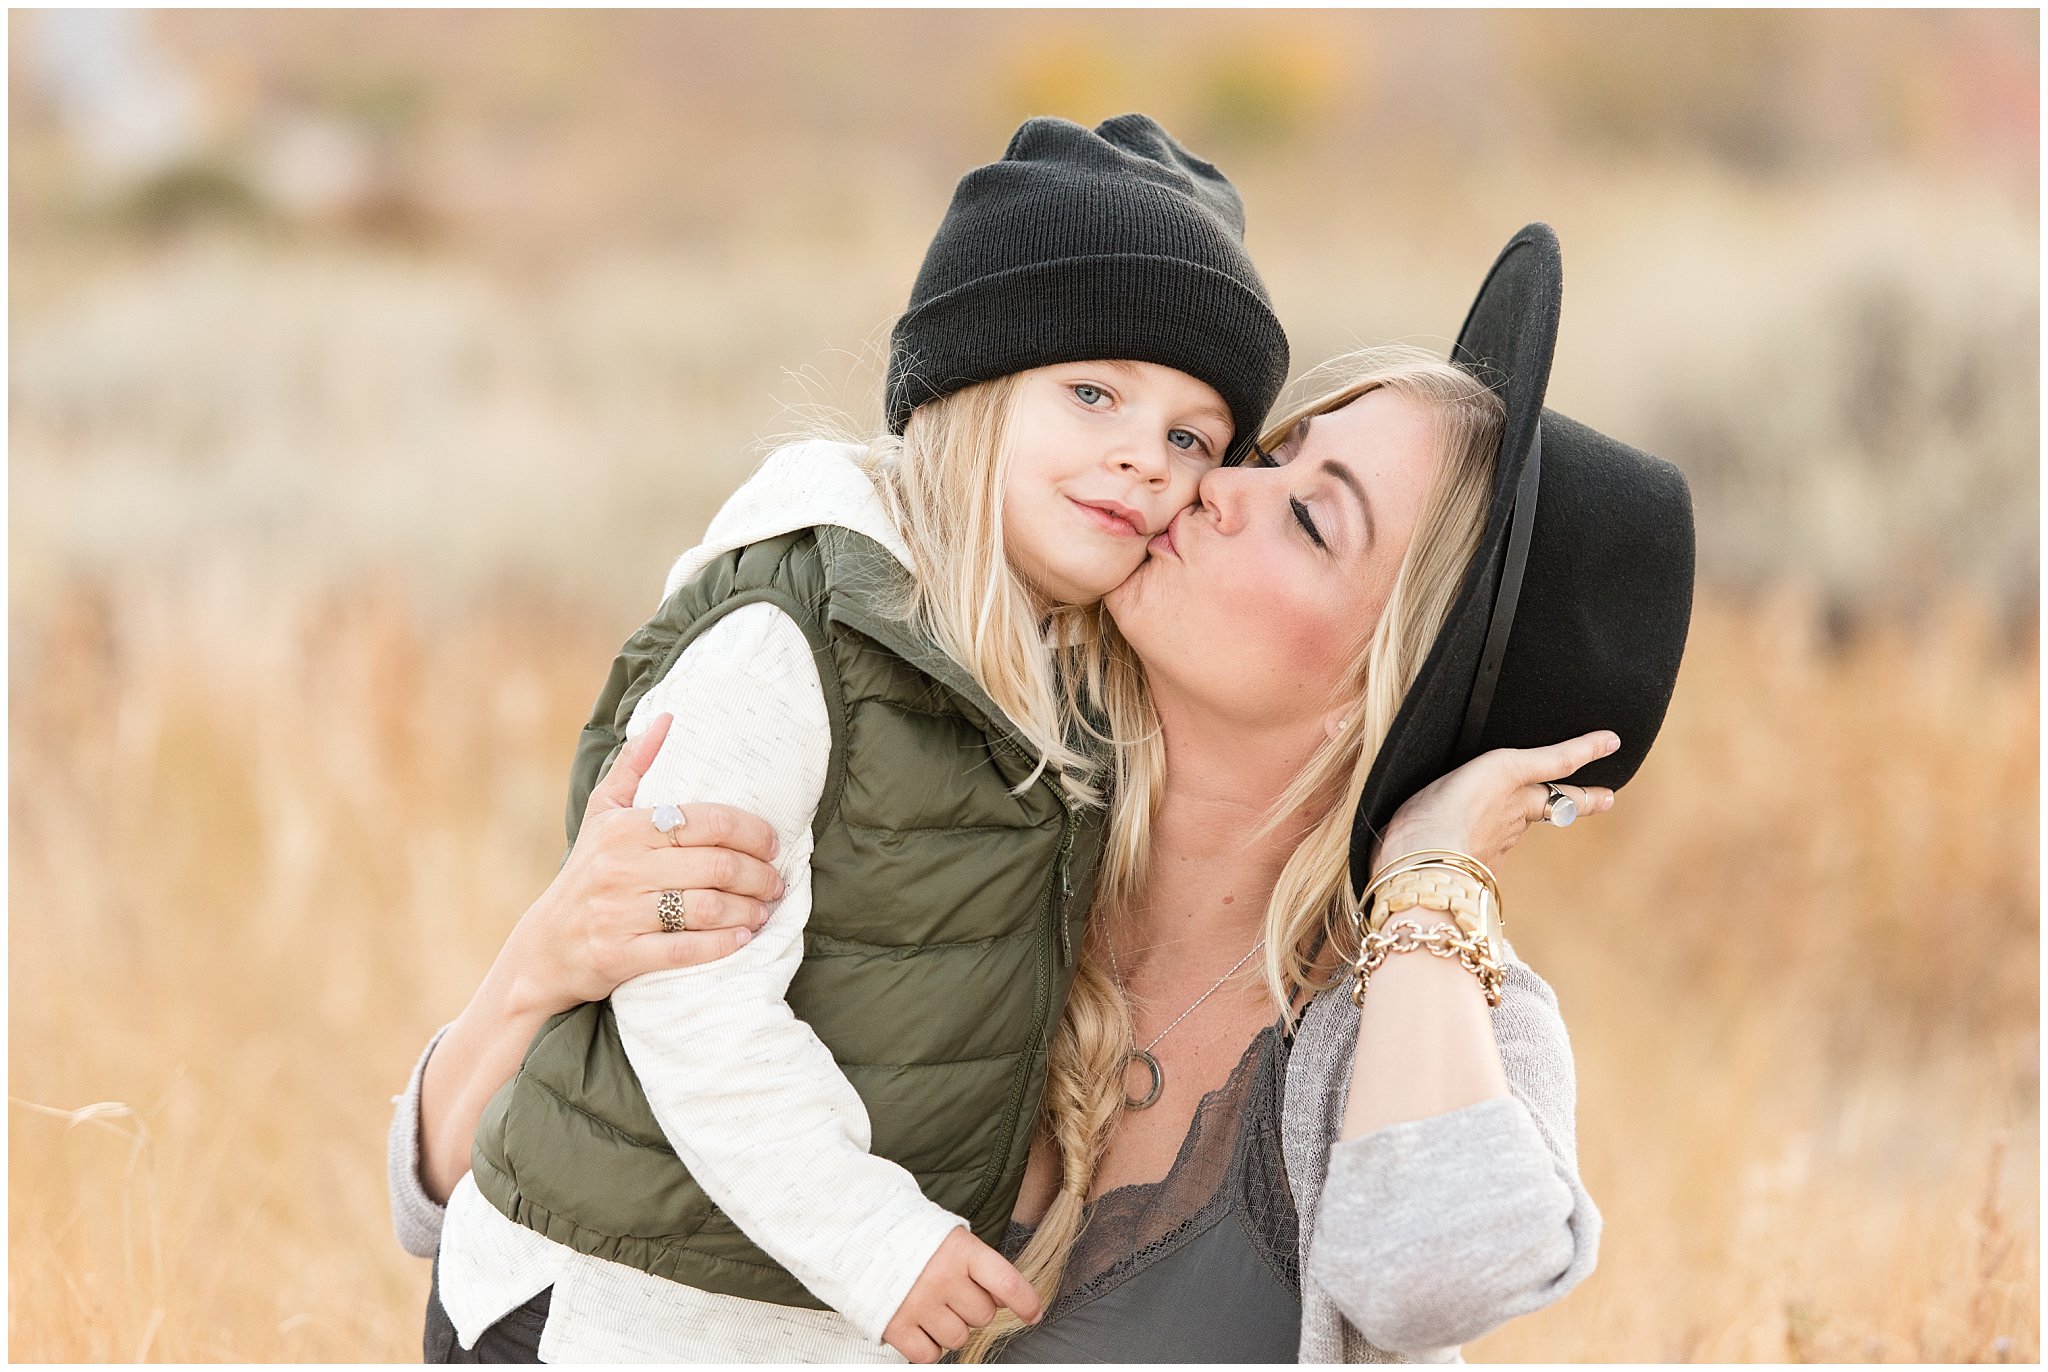 Mom kisses son's cheek during fall family pictures | Fall Family Pictures in the Mountains | Snowbasin, Utah | Jessie and Dallin